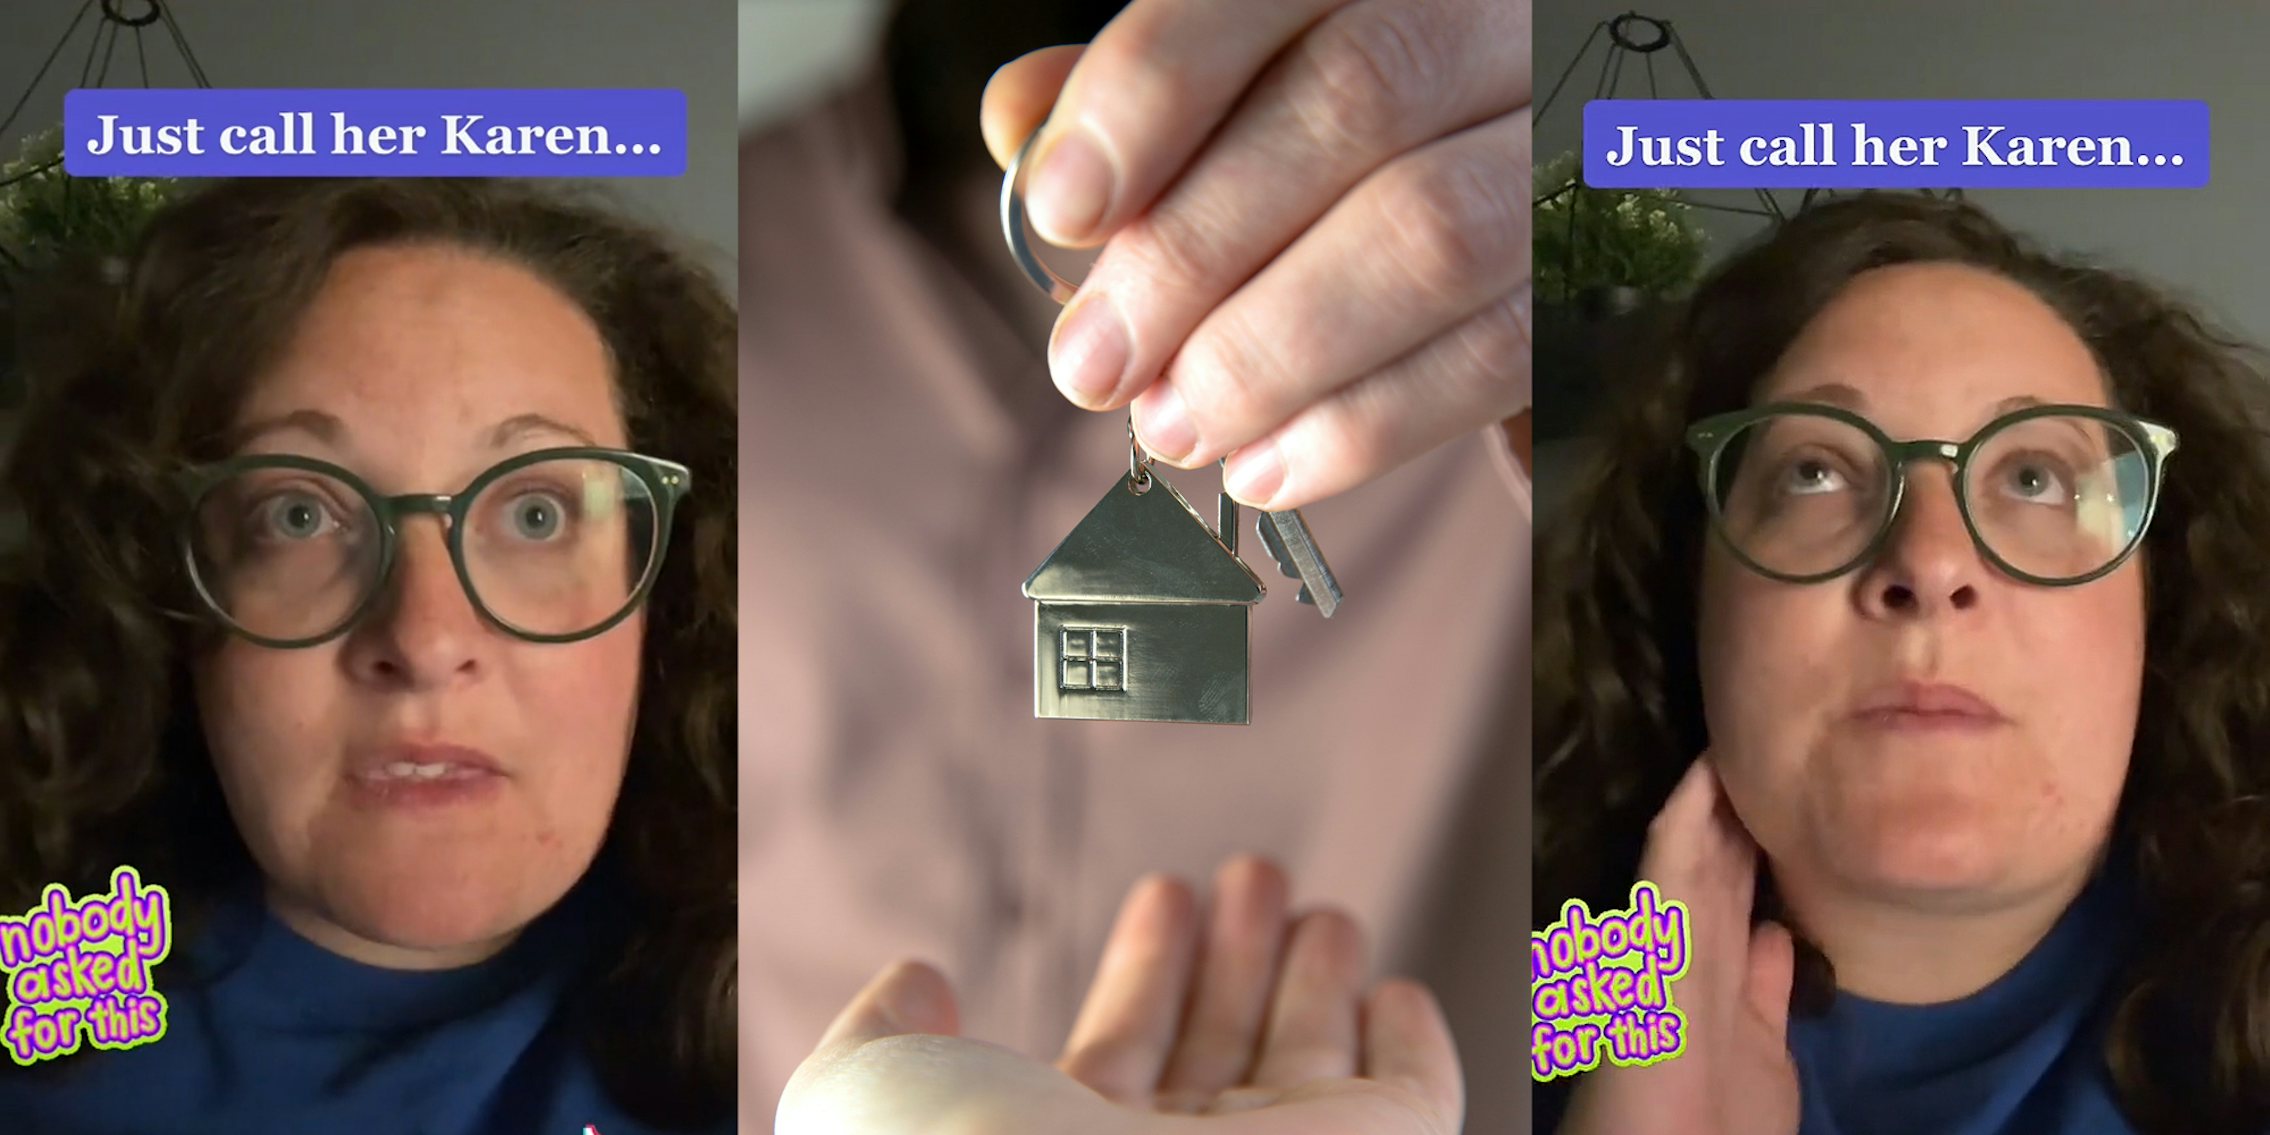 woman shocked expression caption 'Just call her Karen...' (l) buying house concept hand giving keys with house keychain to o-pen hand (c) Woman annoyed expression caption 'Just call her Karen...' (r)